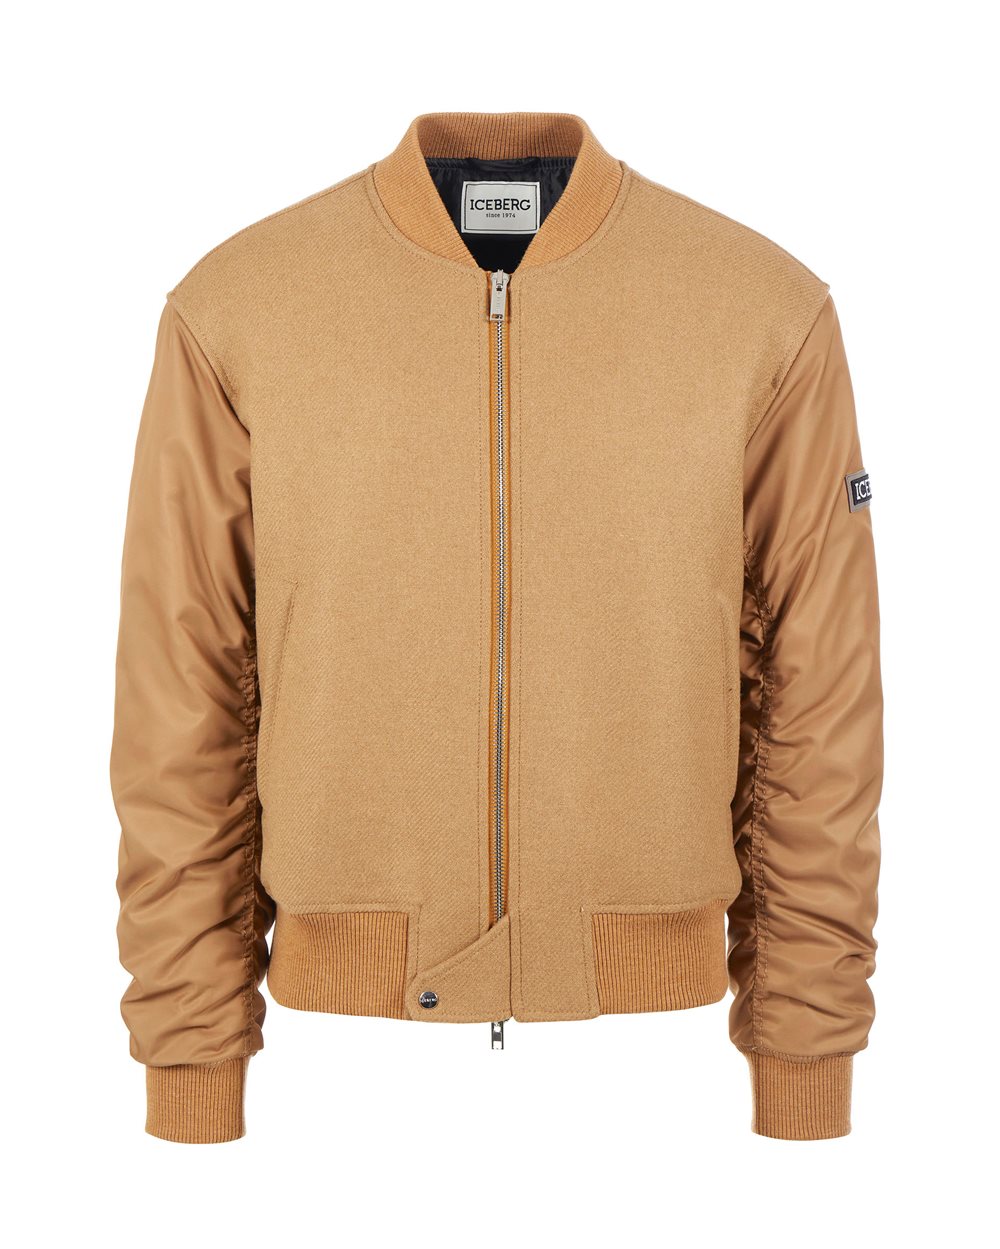 Bomber jacket with logo - ( SECONDO STEP IT ) PROMO SALDI UP TO 40% | Iceberg - Official Website